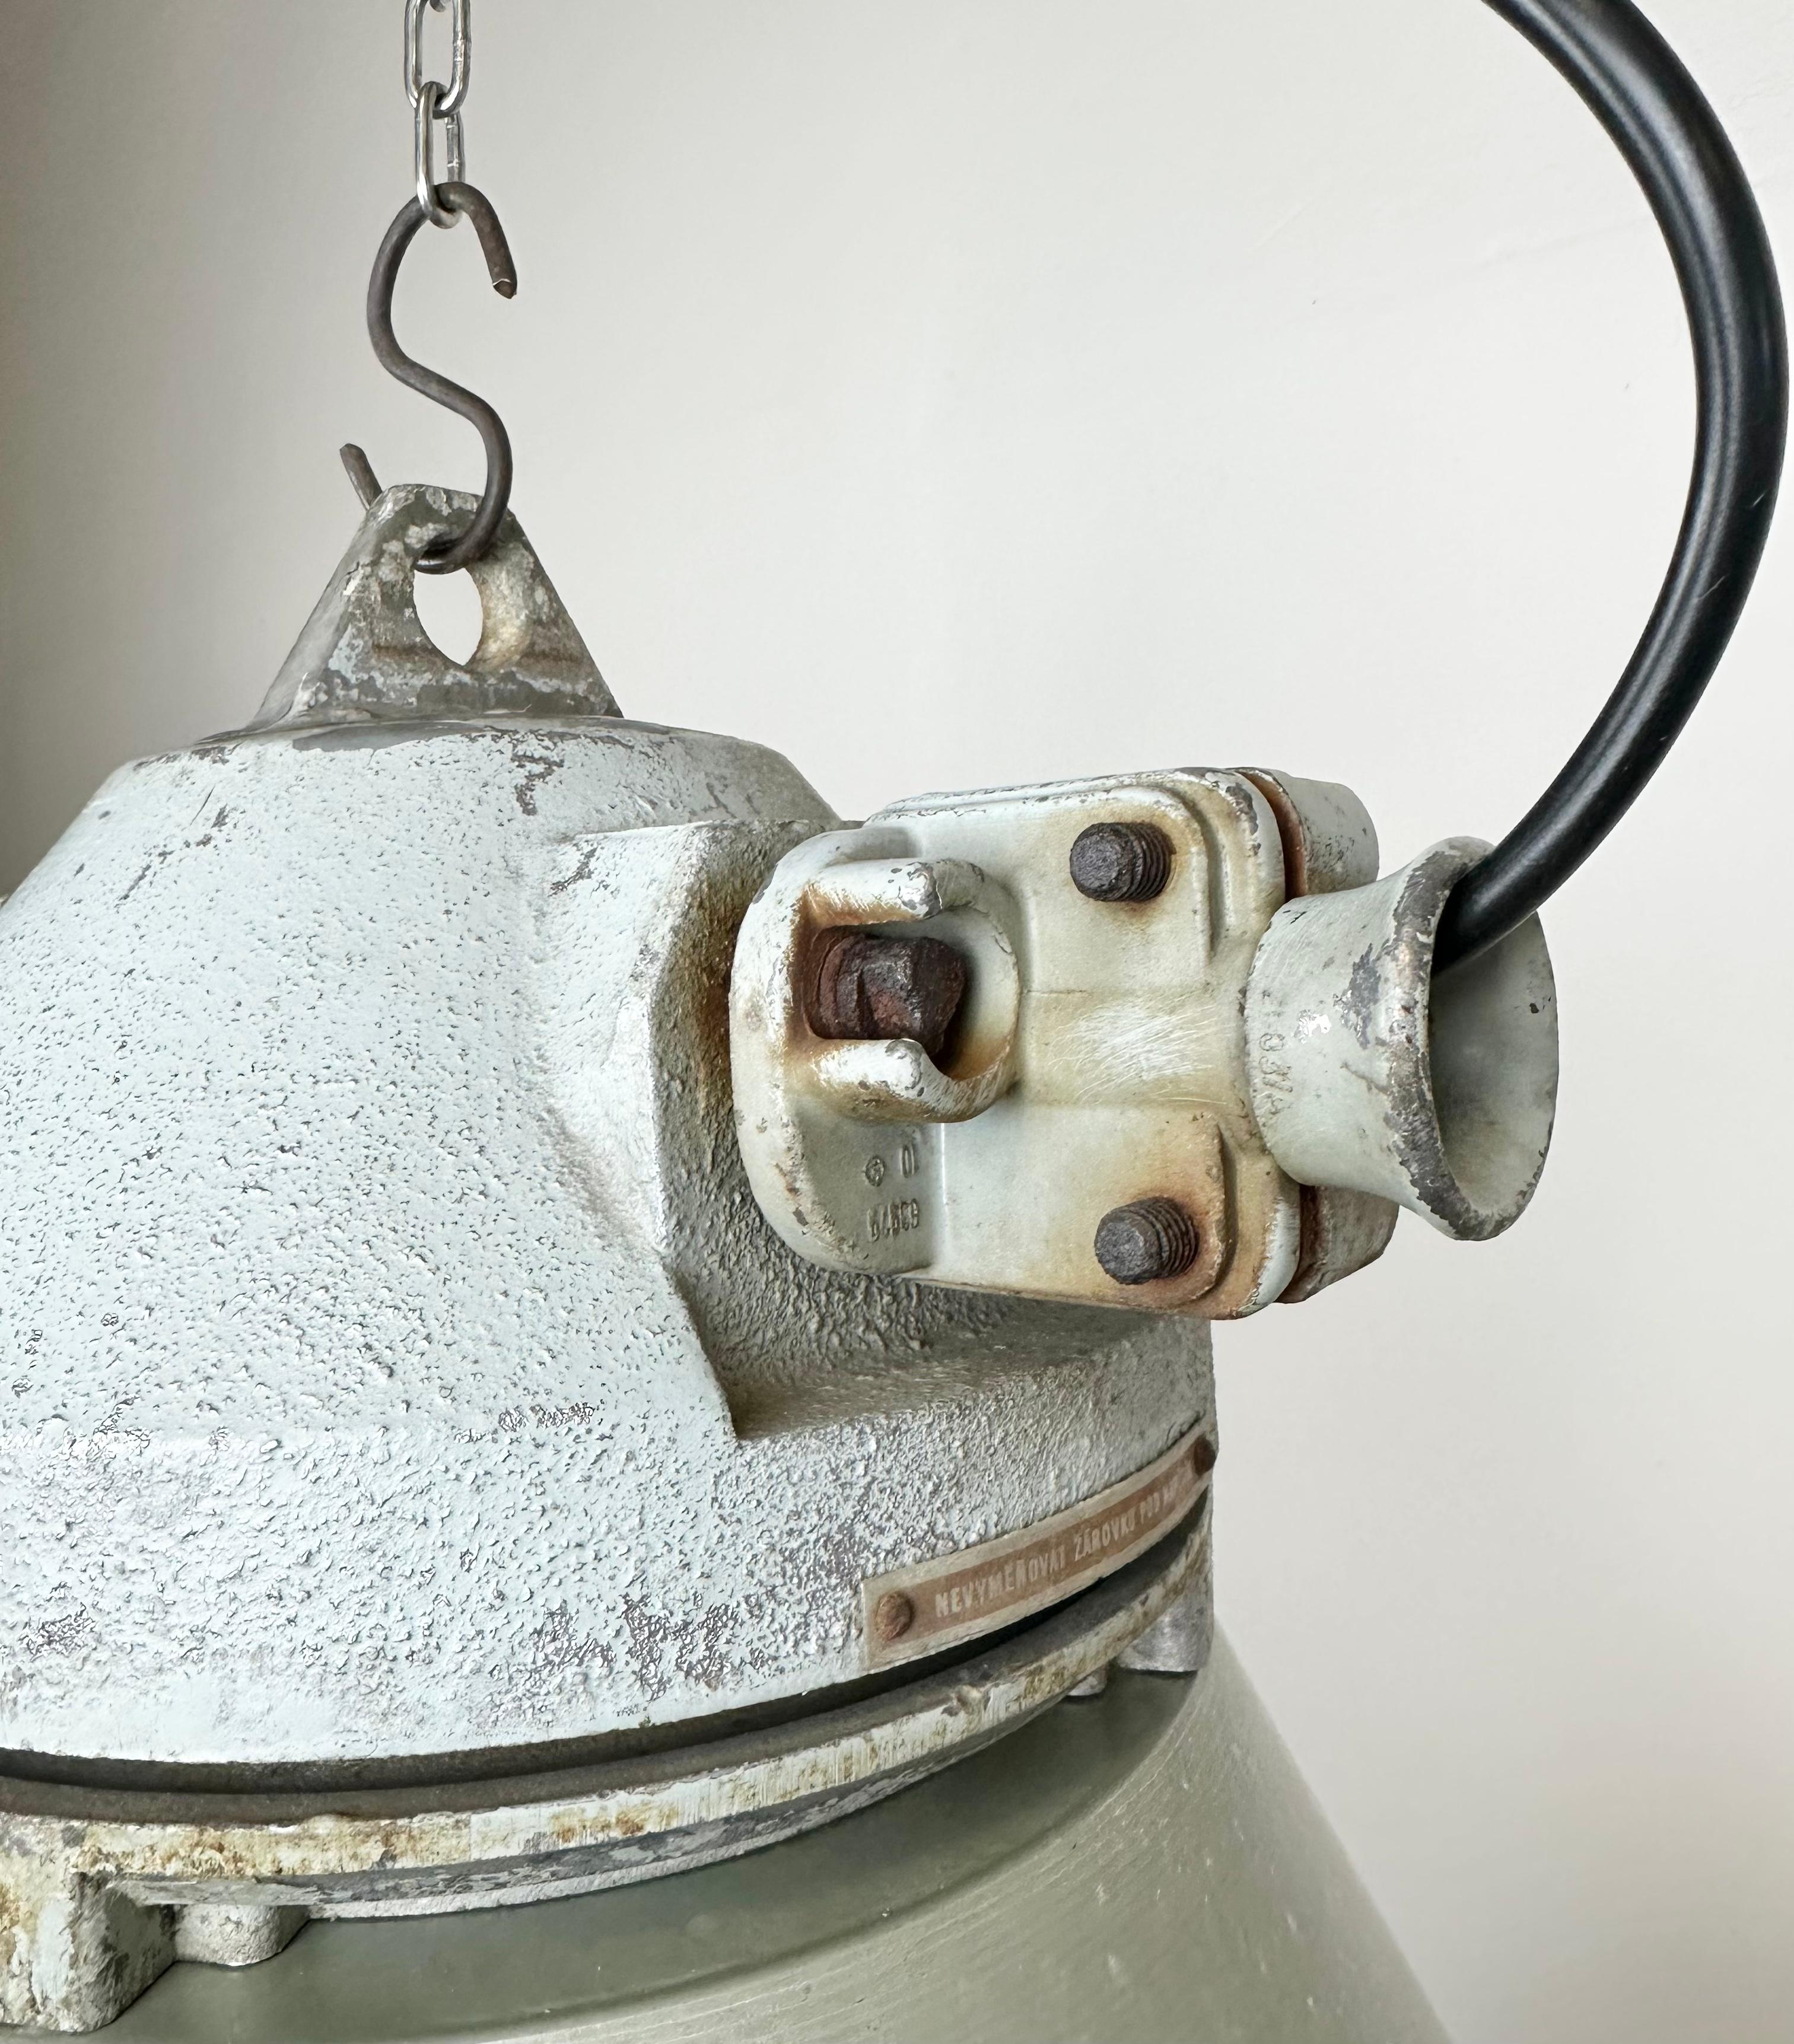 Industrial Explosion Proof Lamp with Aluminium Shade from Elektrosvit, 1970s For Sale 2